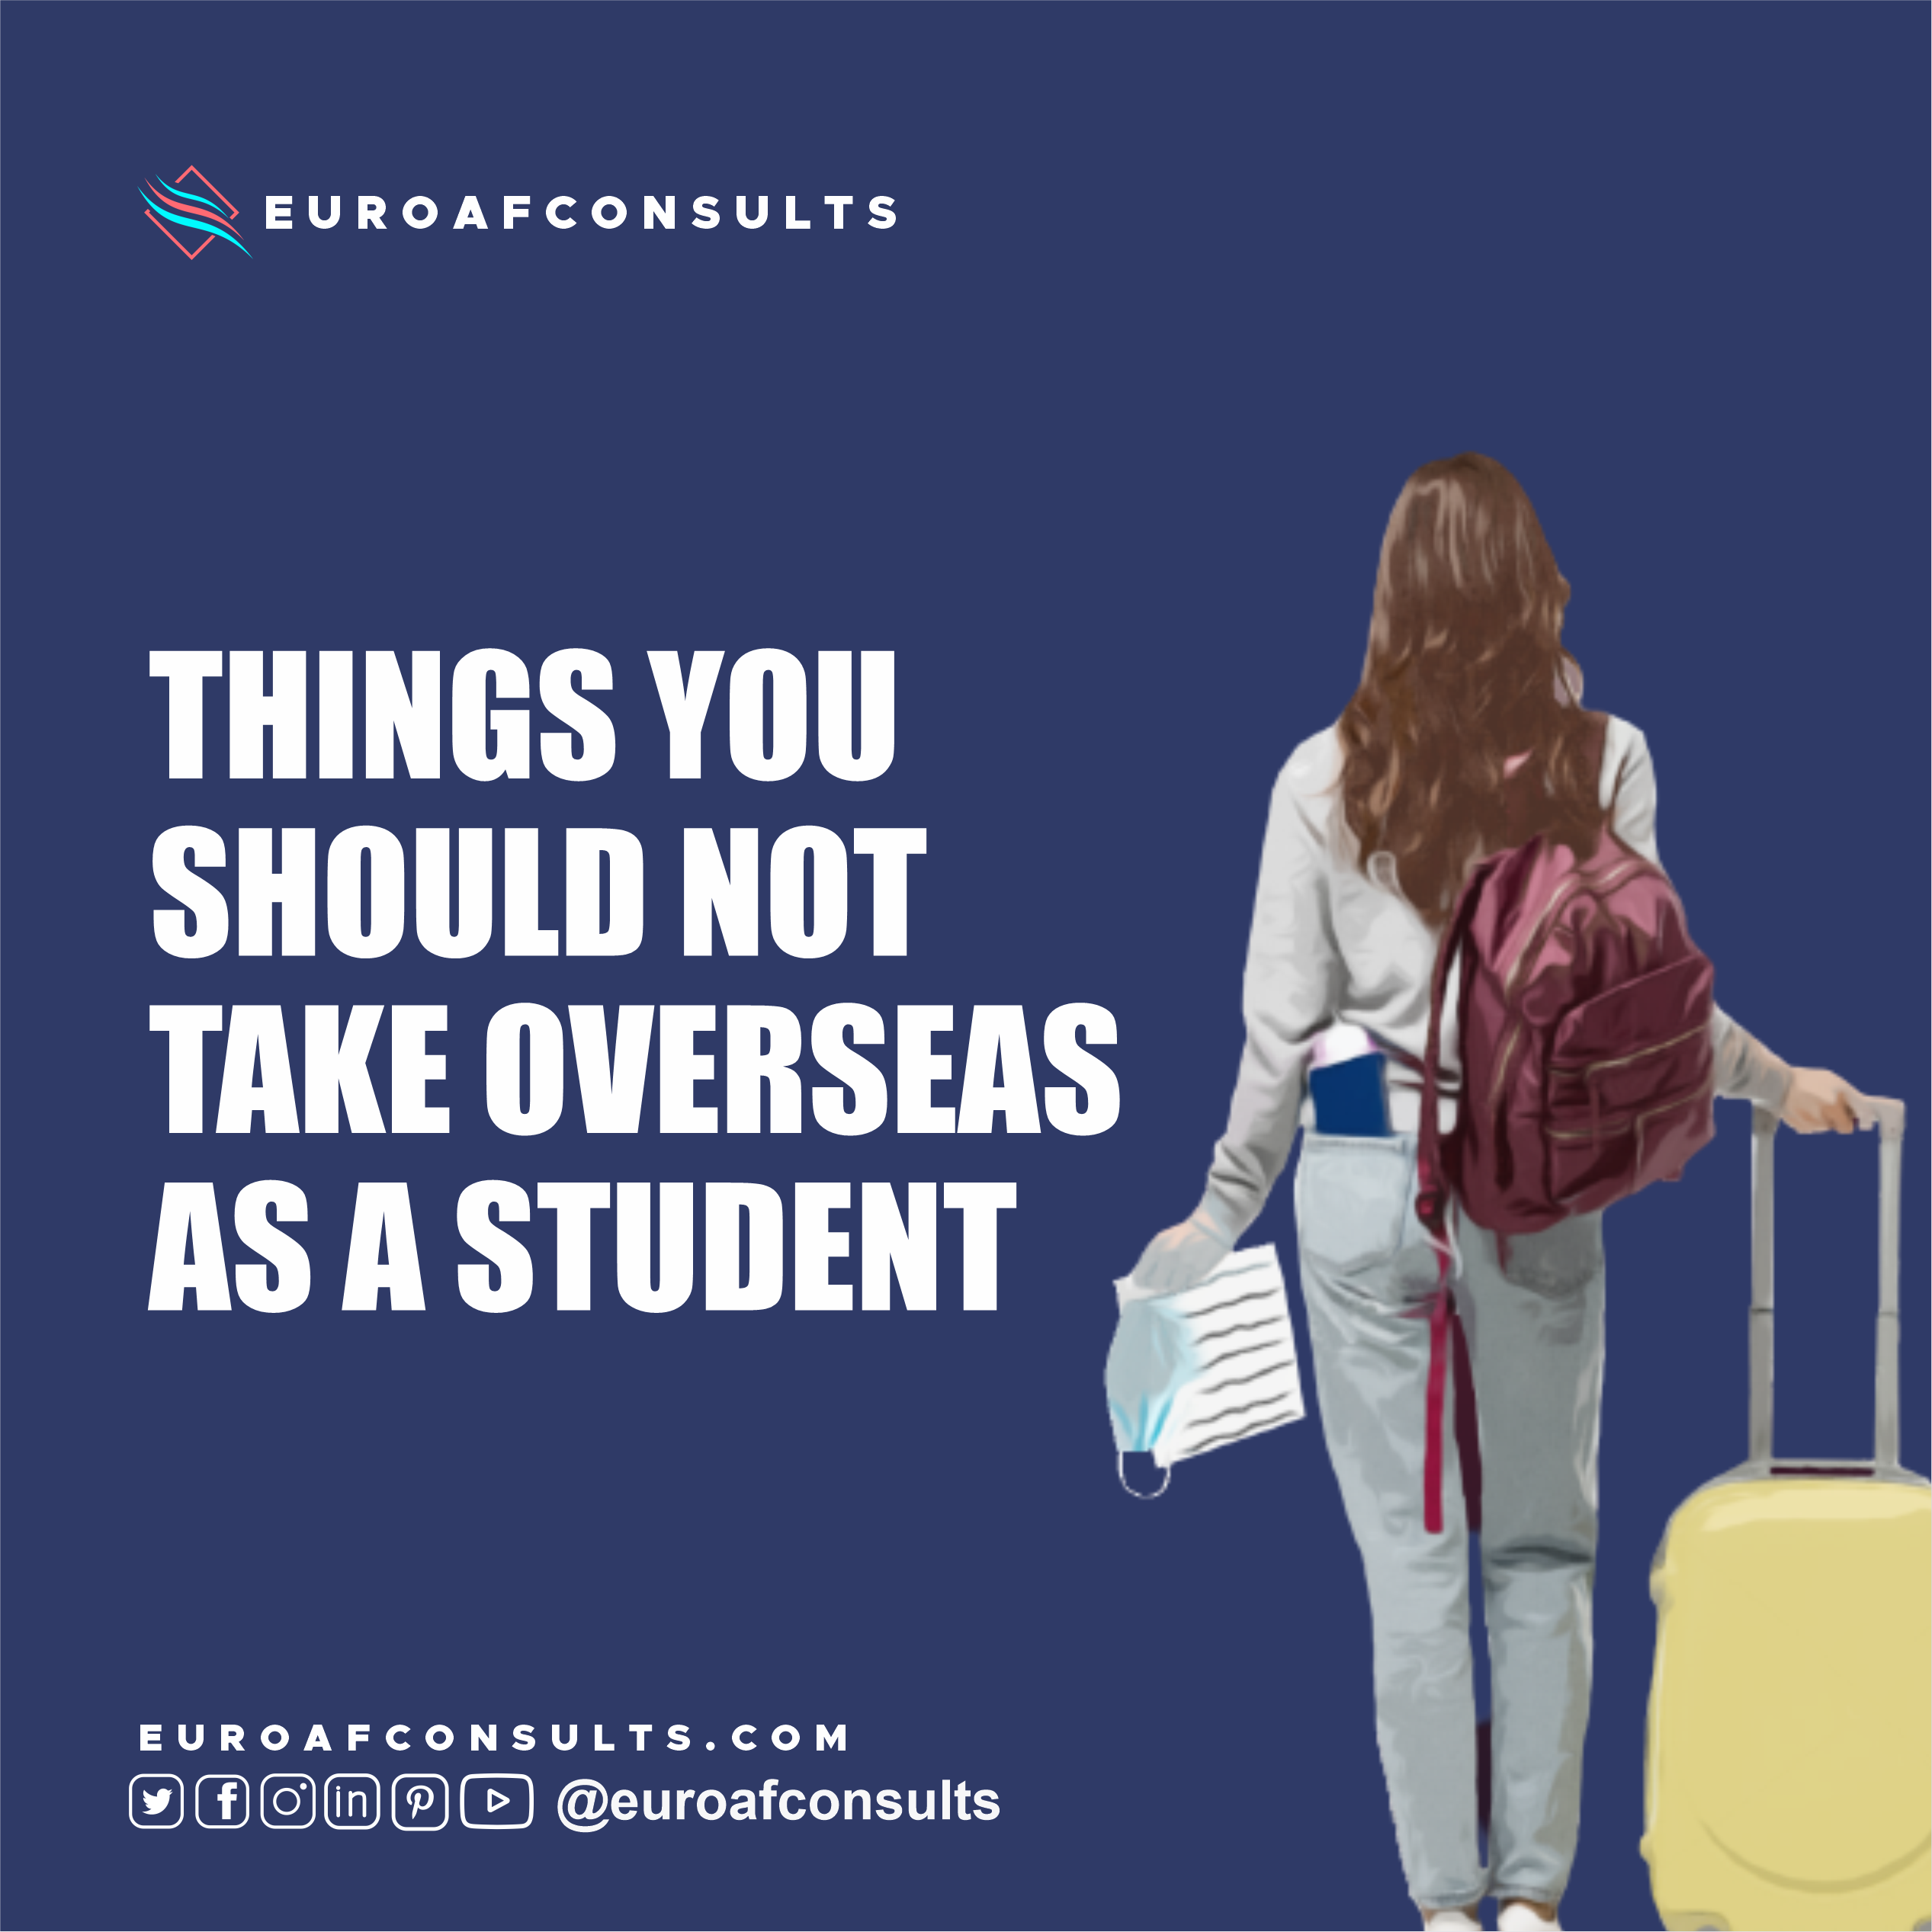 You are currently viewing THINGS YOU SHOULD NOT TAKE OVERSEAS AS A STUDENT